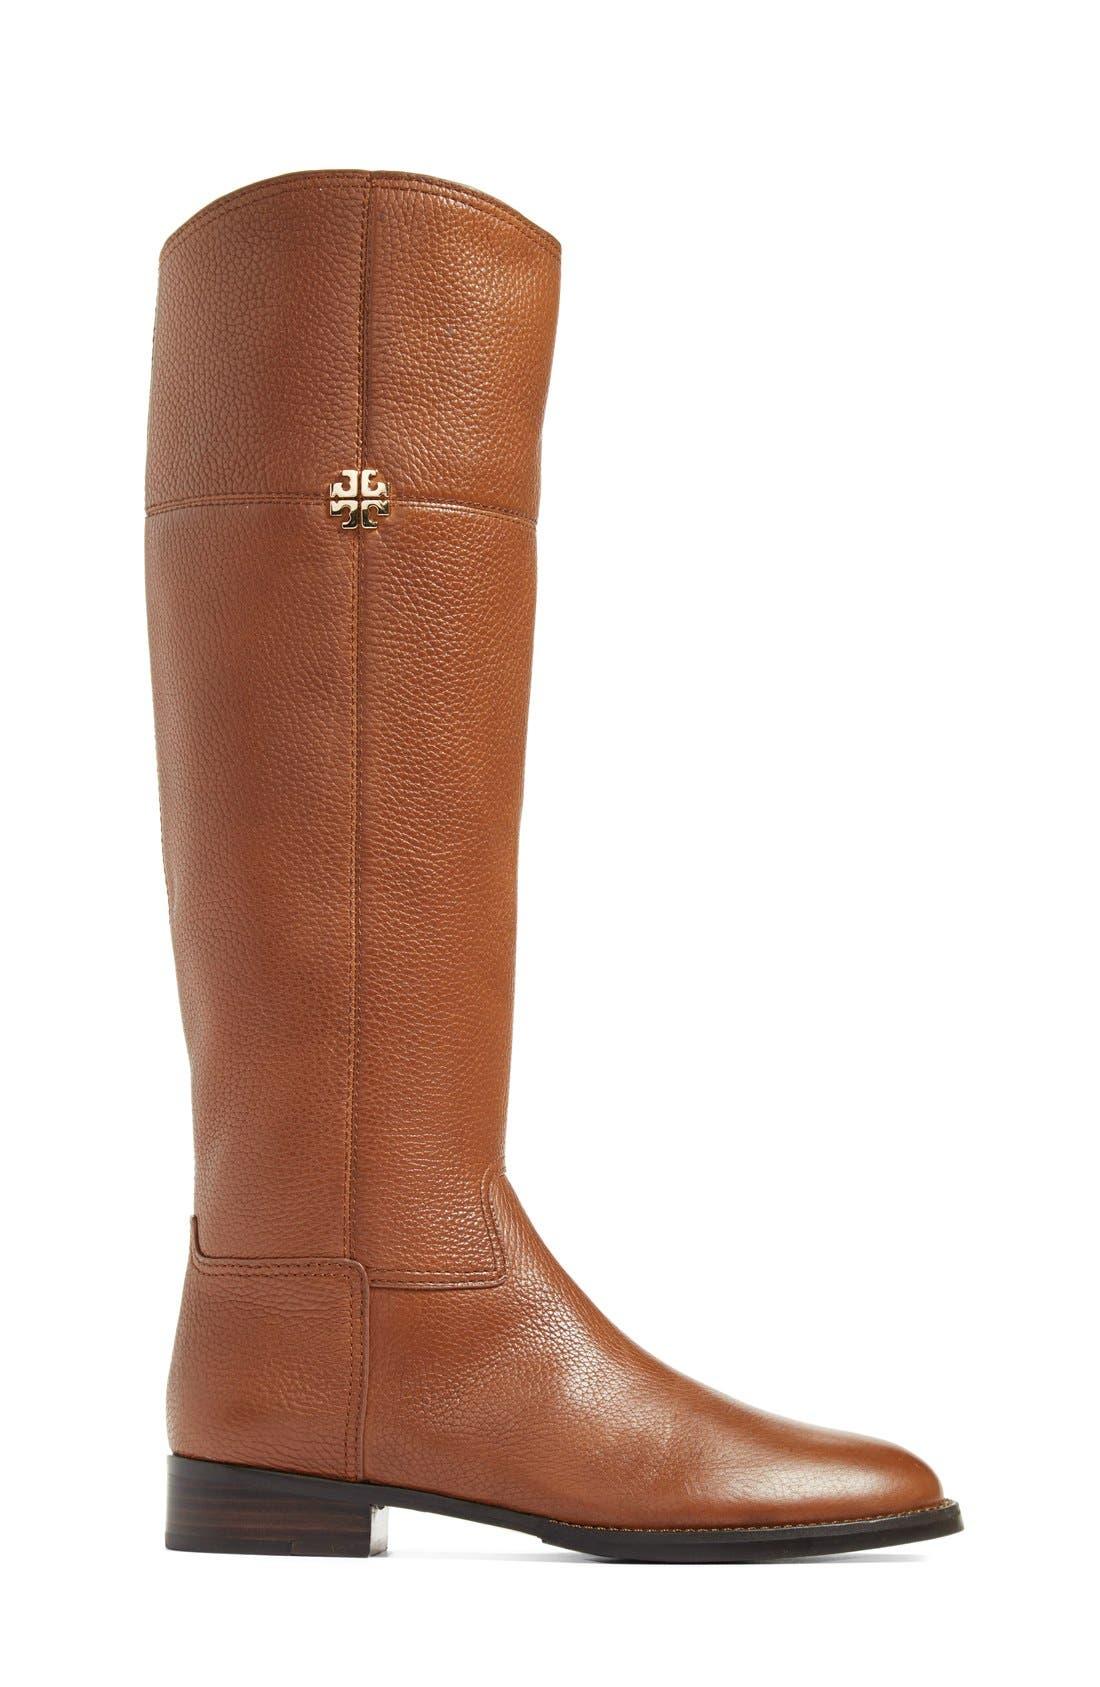 Tory Burch 'jolie' Riding Boot in Brown | Lyst